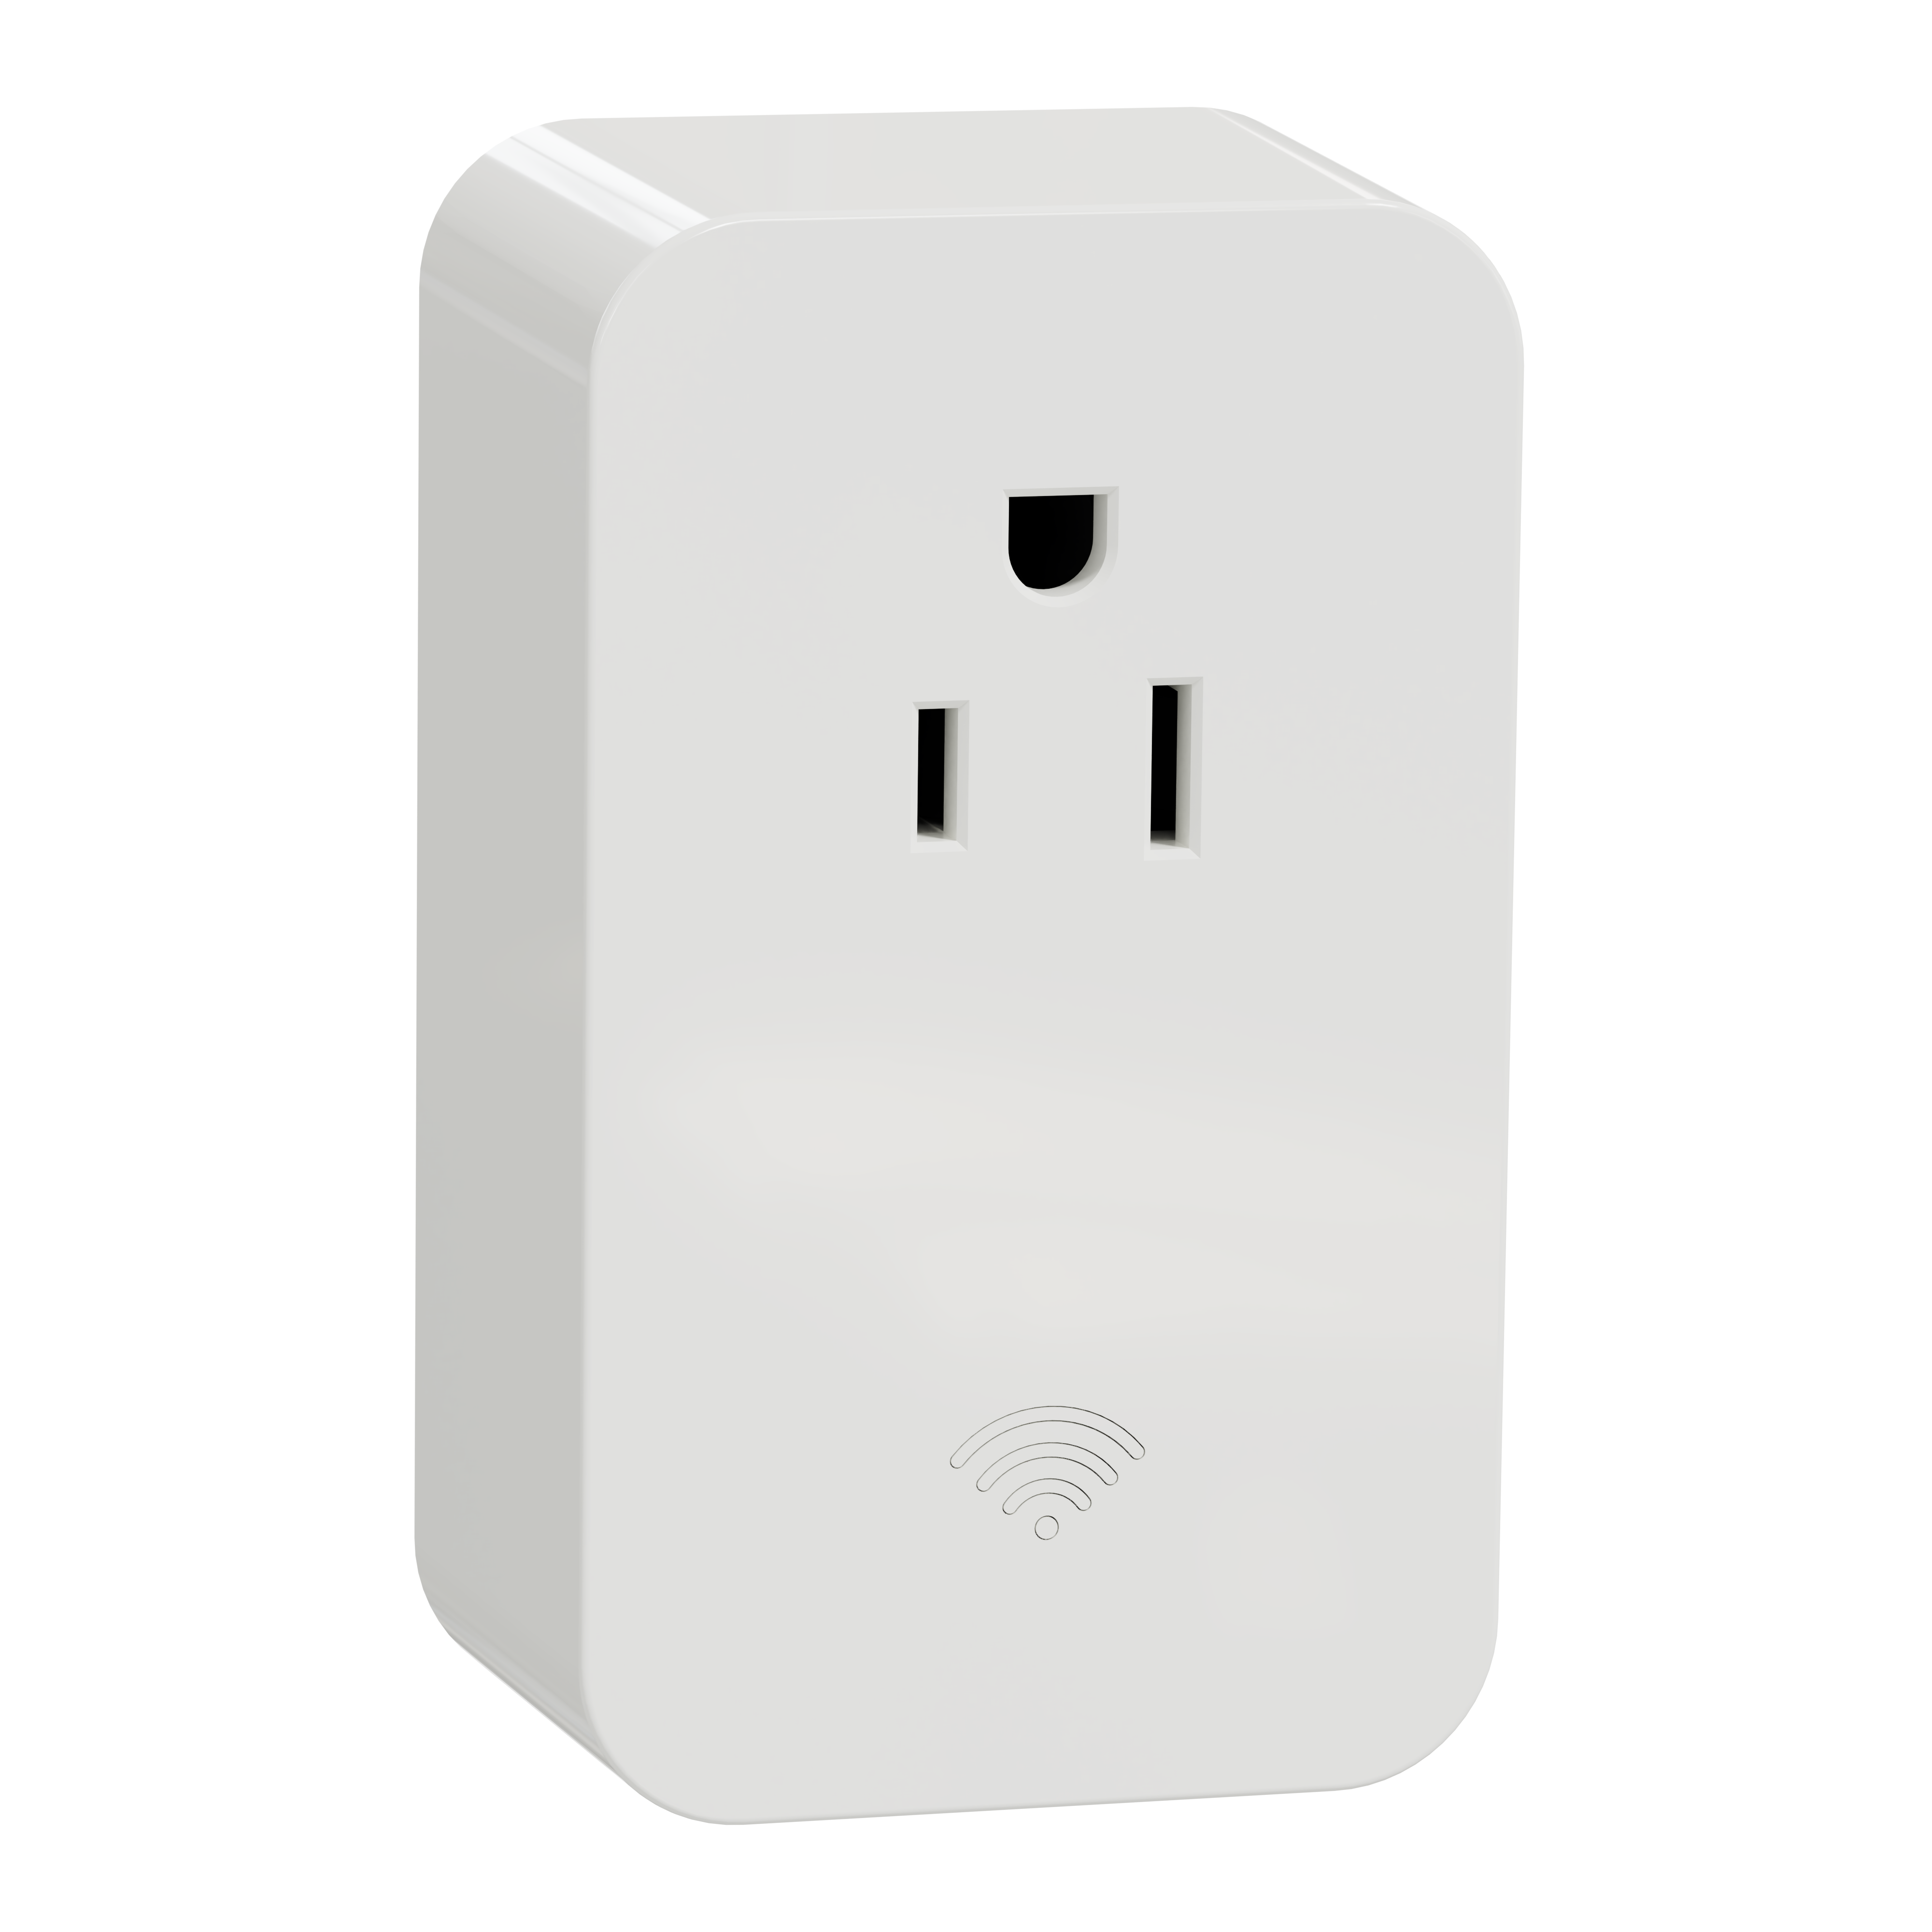 Socket-outlet, X Series, 15A, plug-in, WiFi connected, white, matte finish